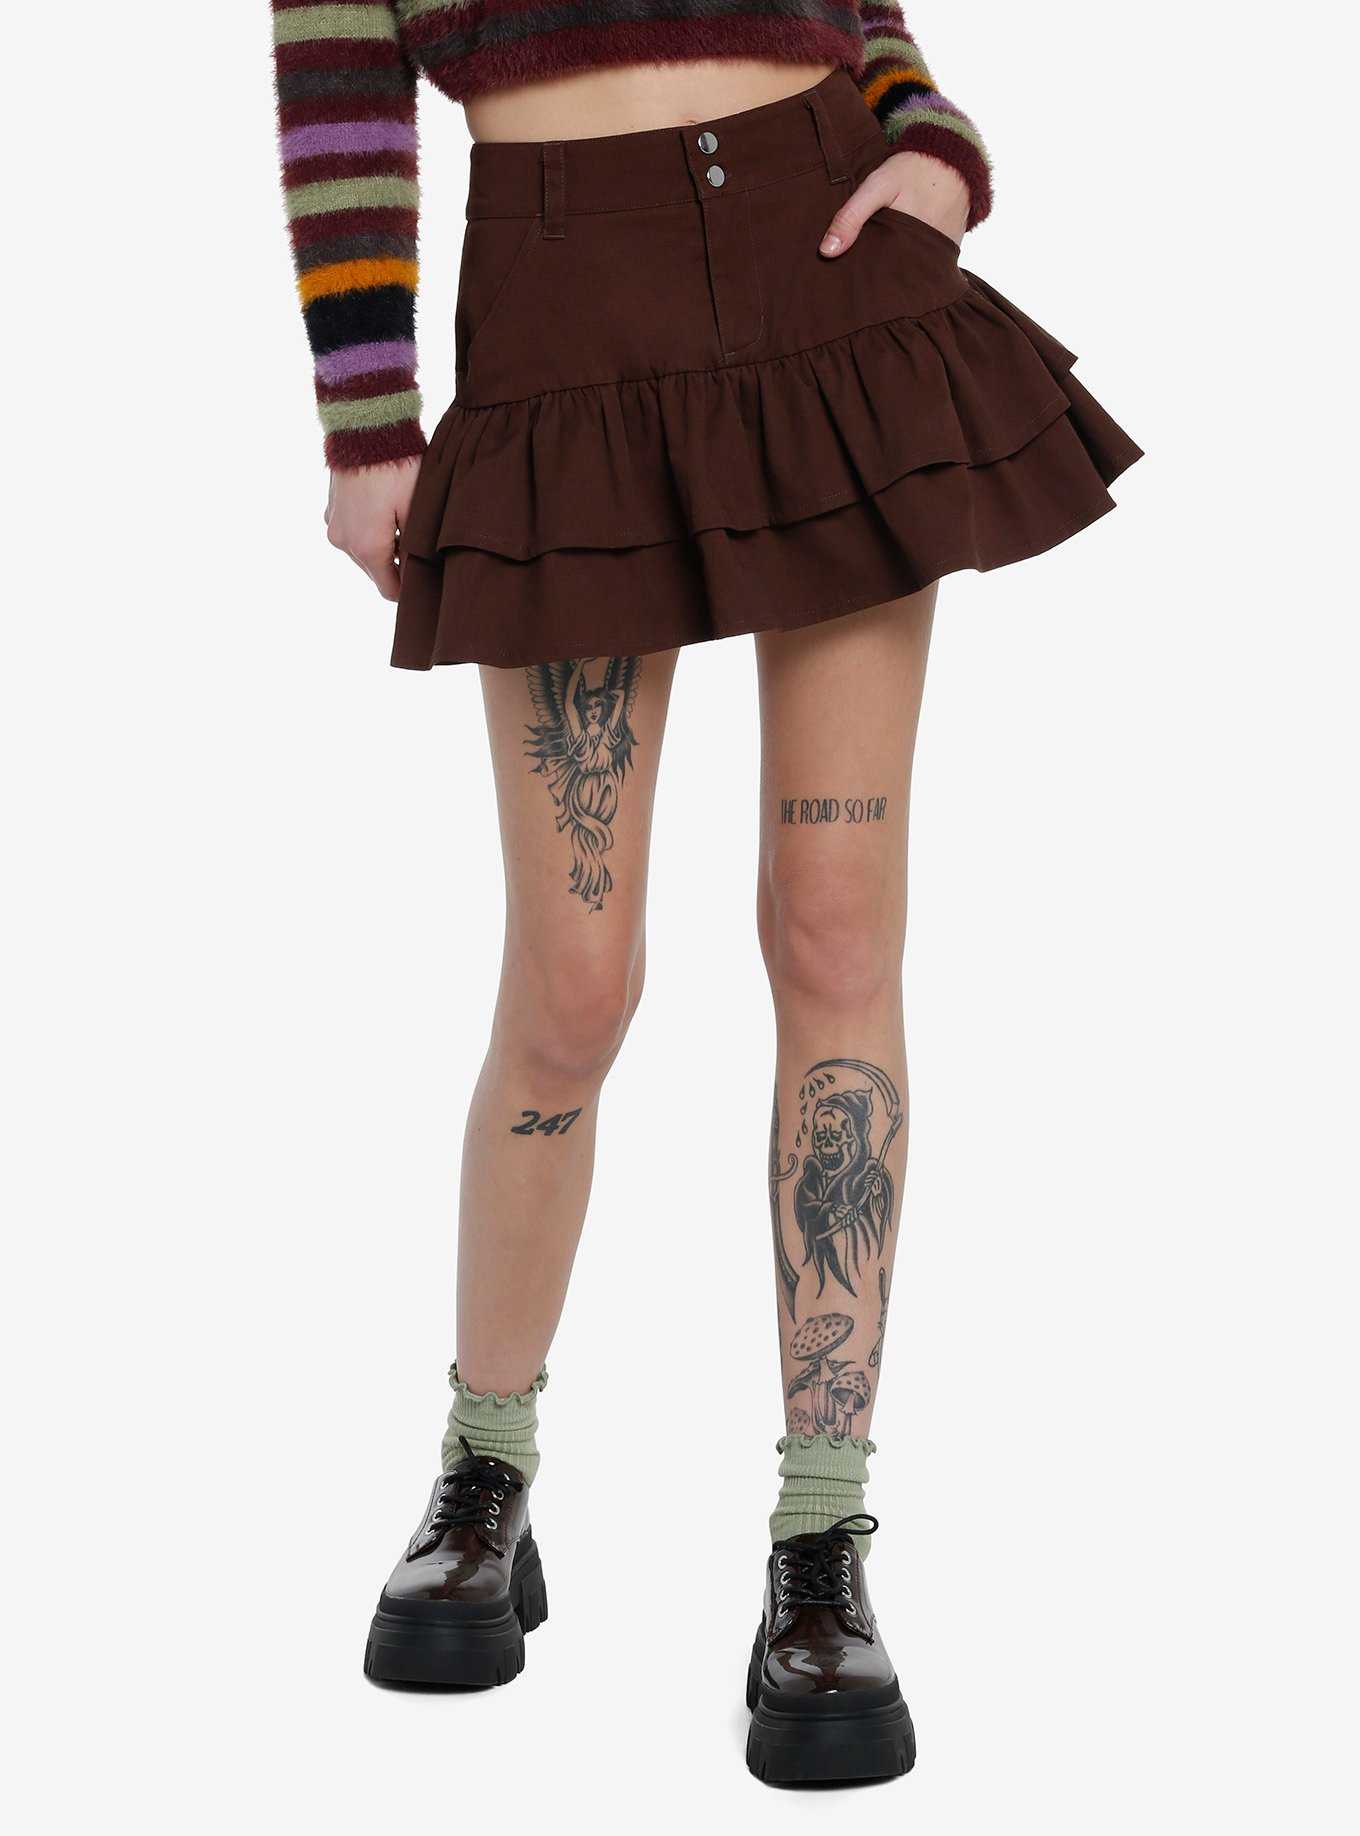 Social Collision Brown Double Ruffle Skirt, , hi-res